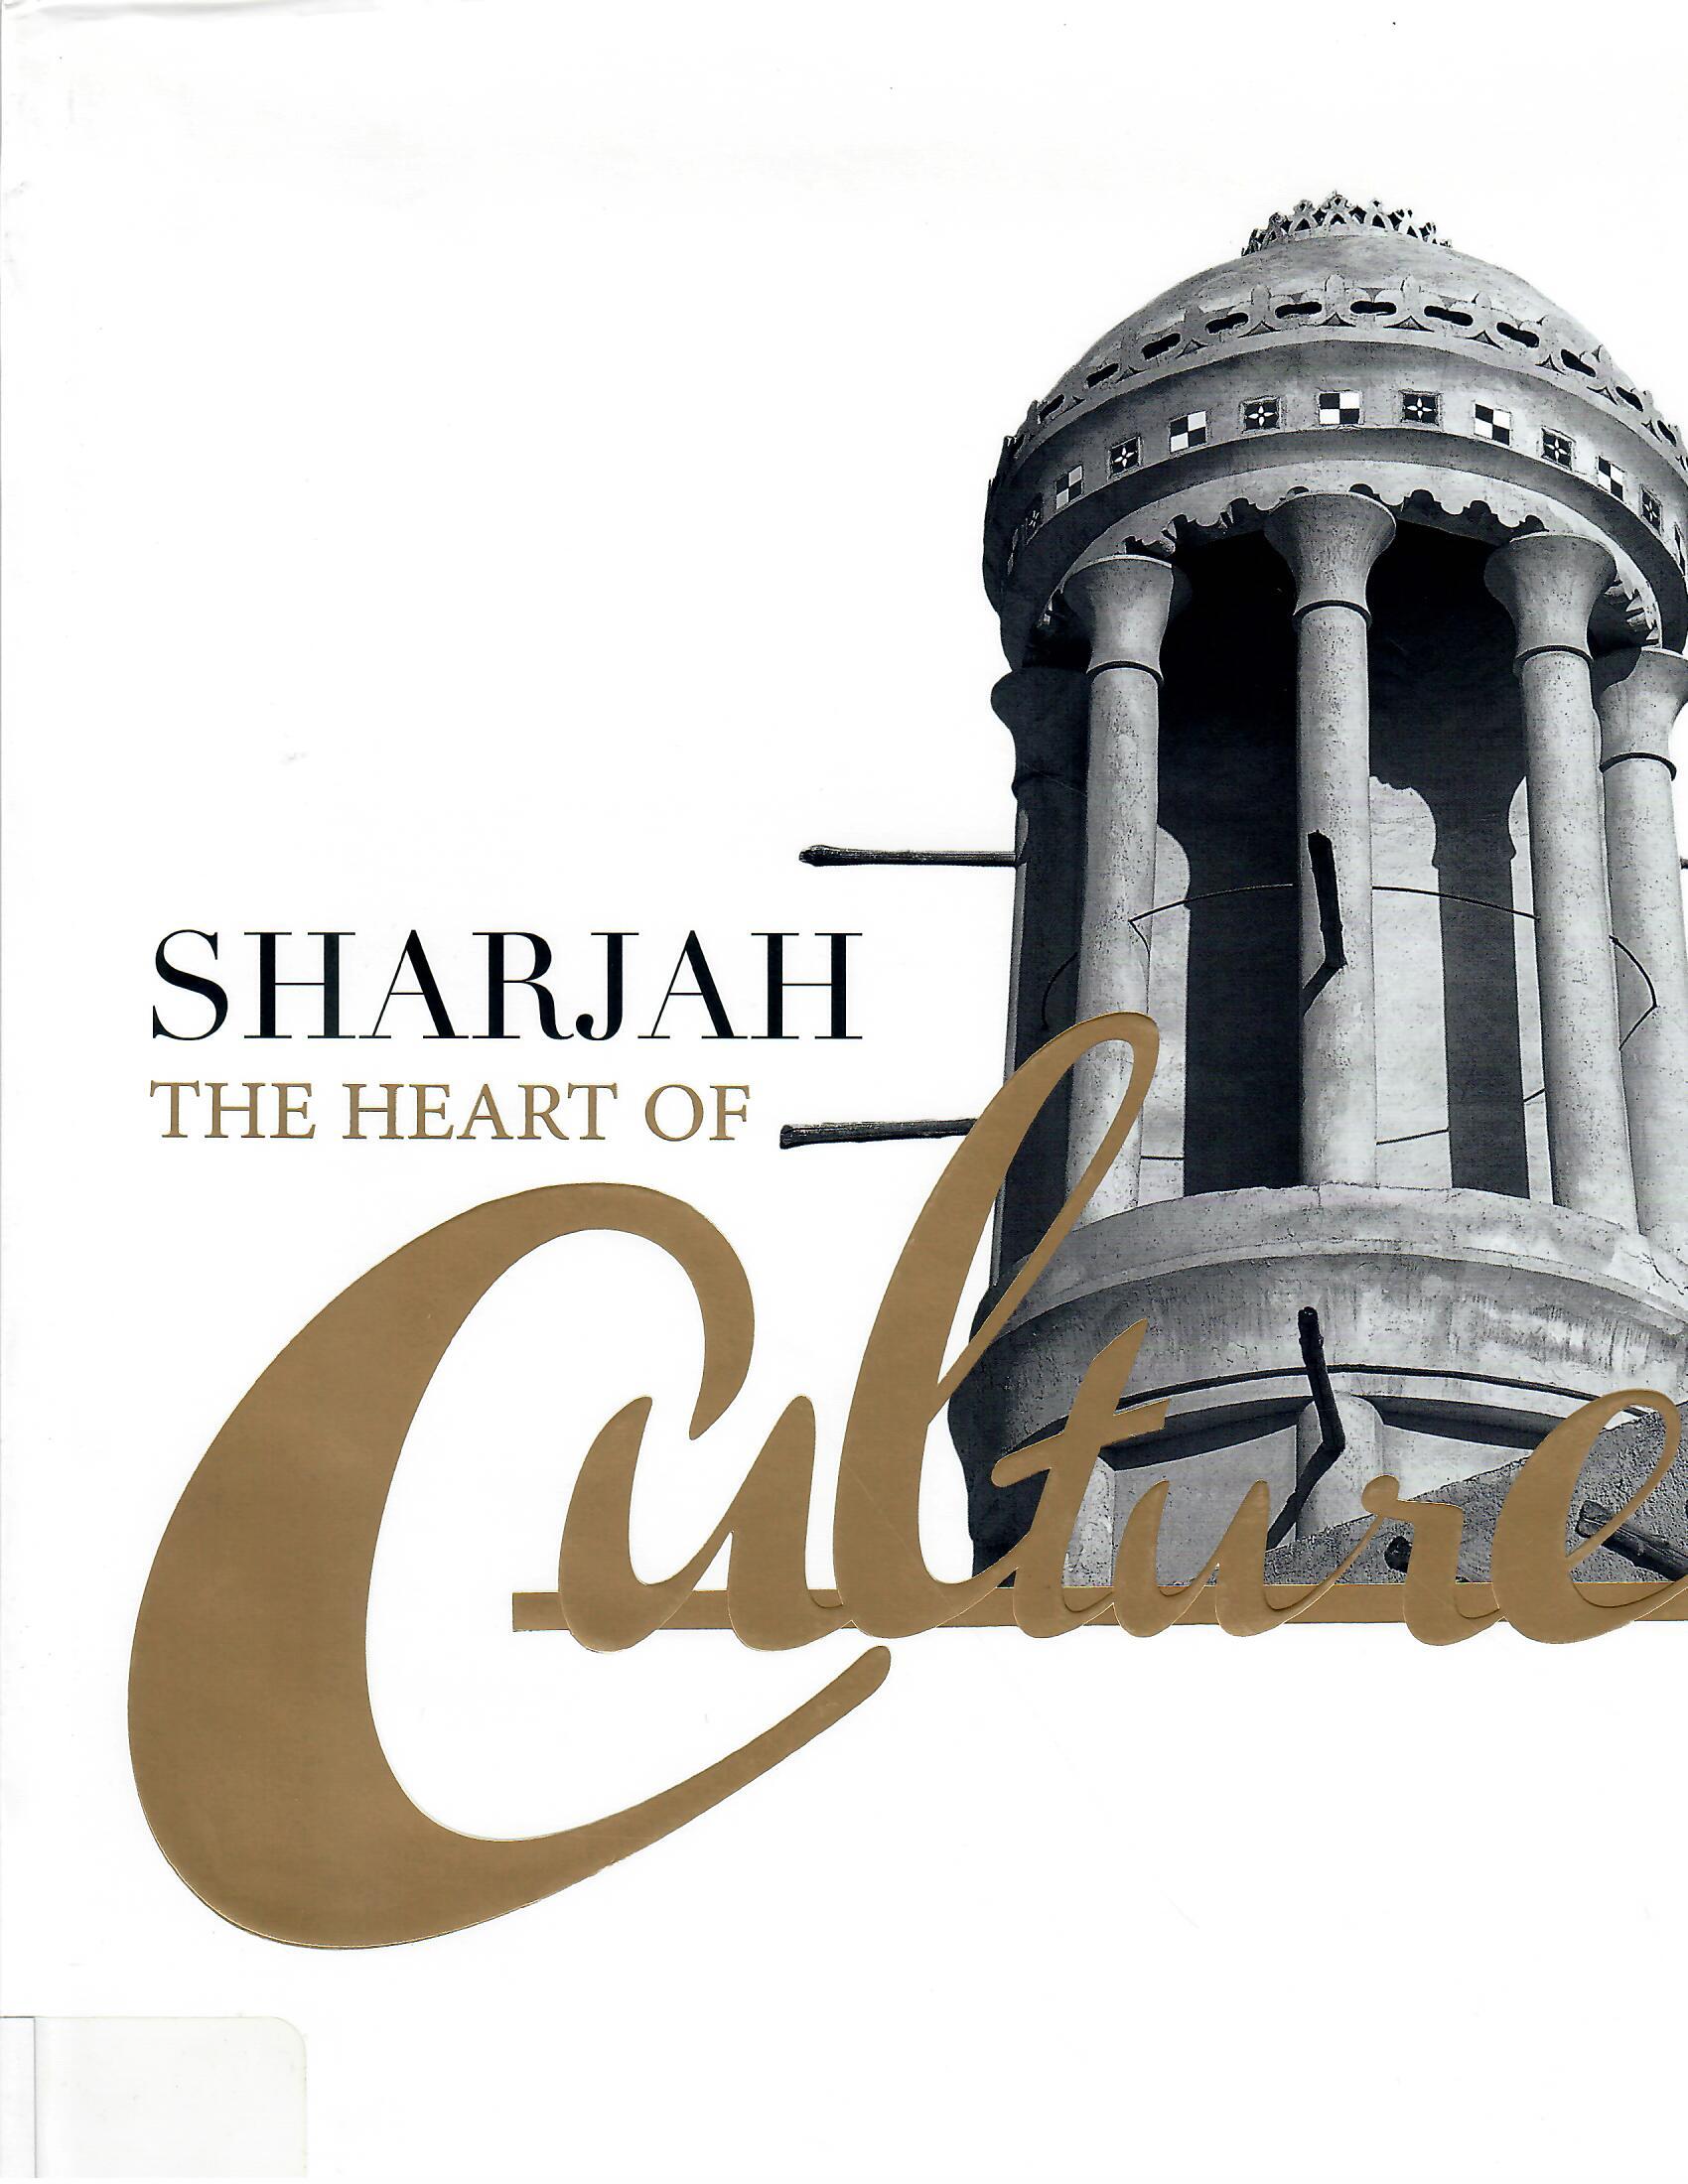 SHARJAH THE HEART OF CULTURE